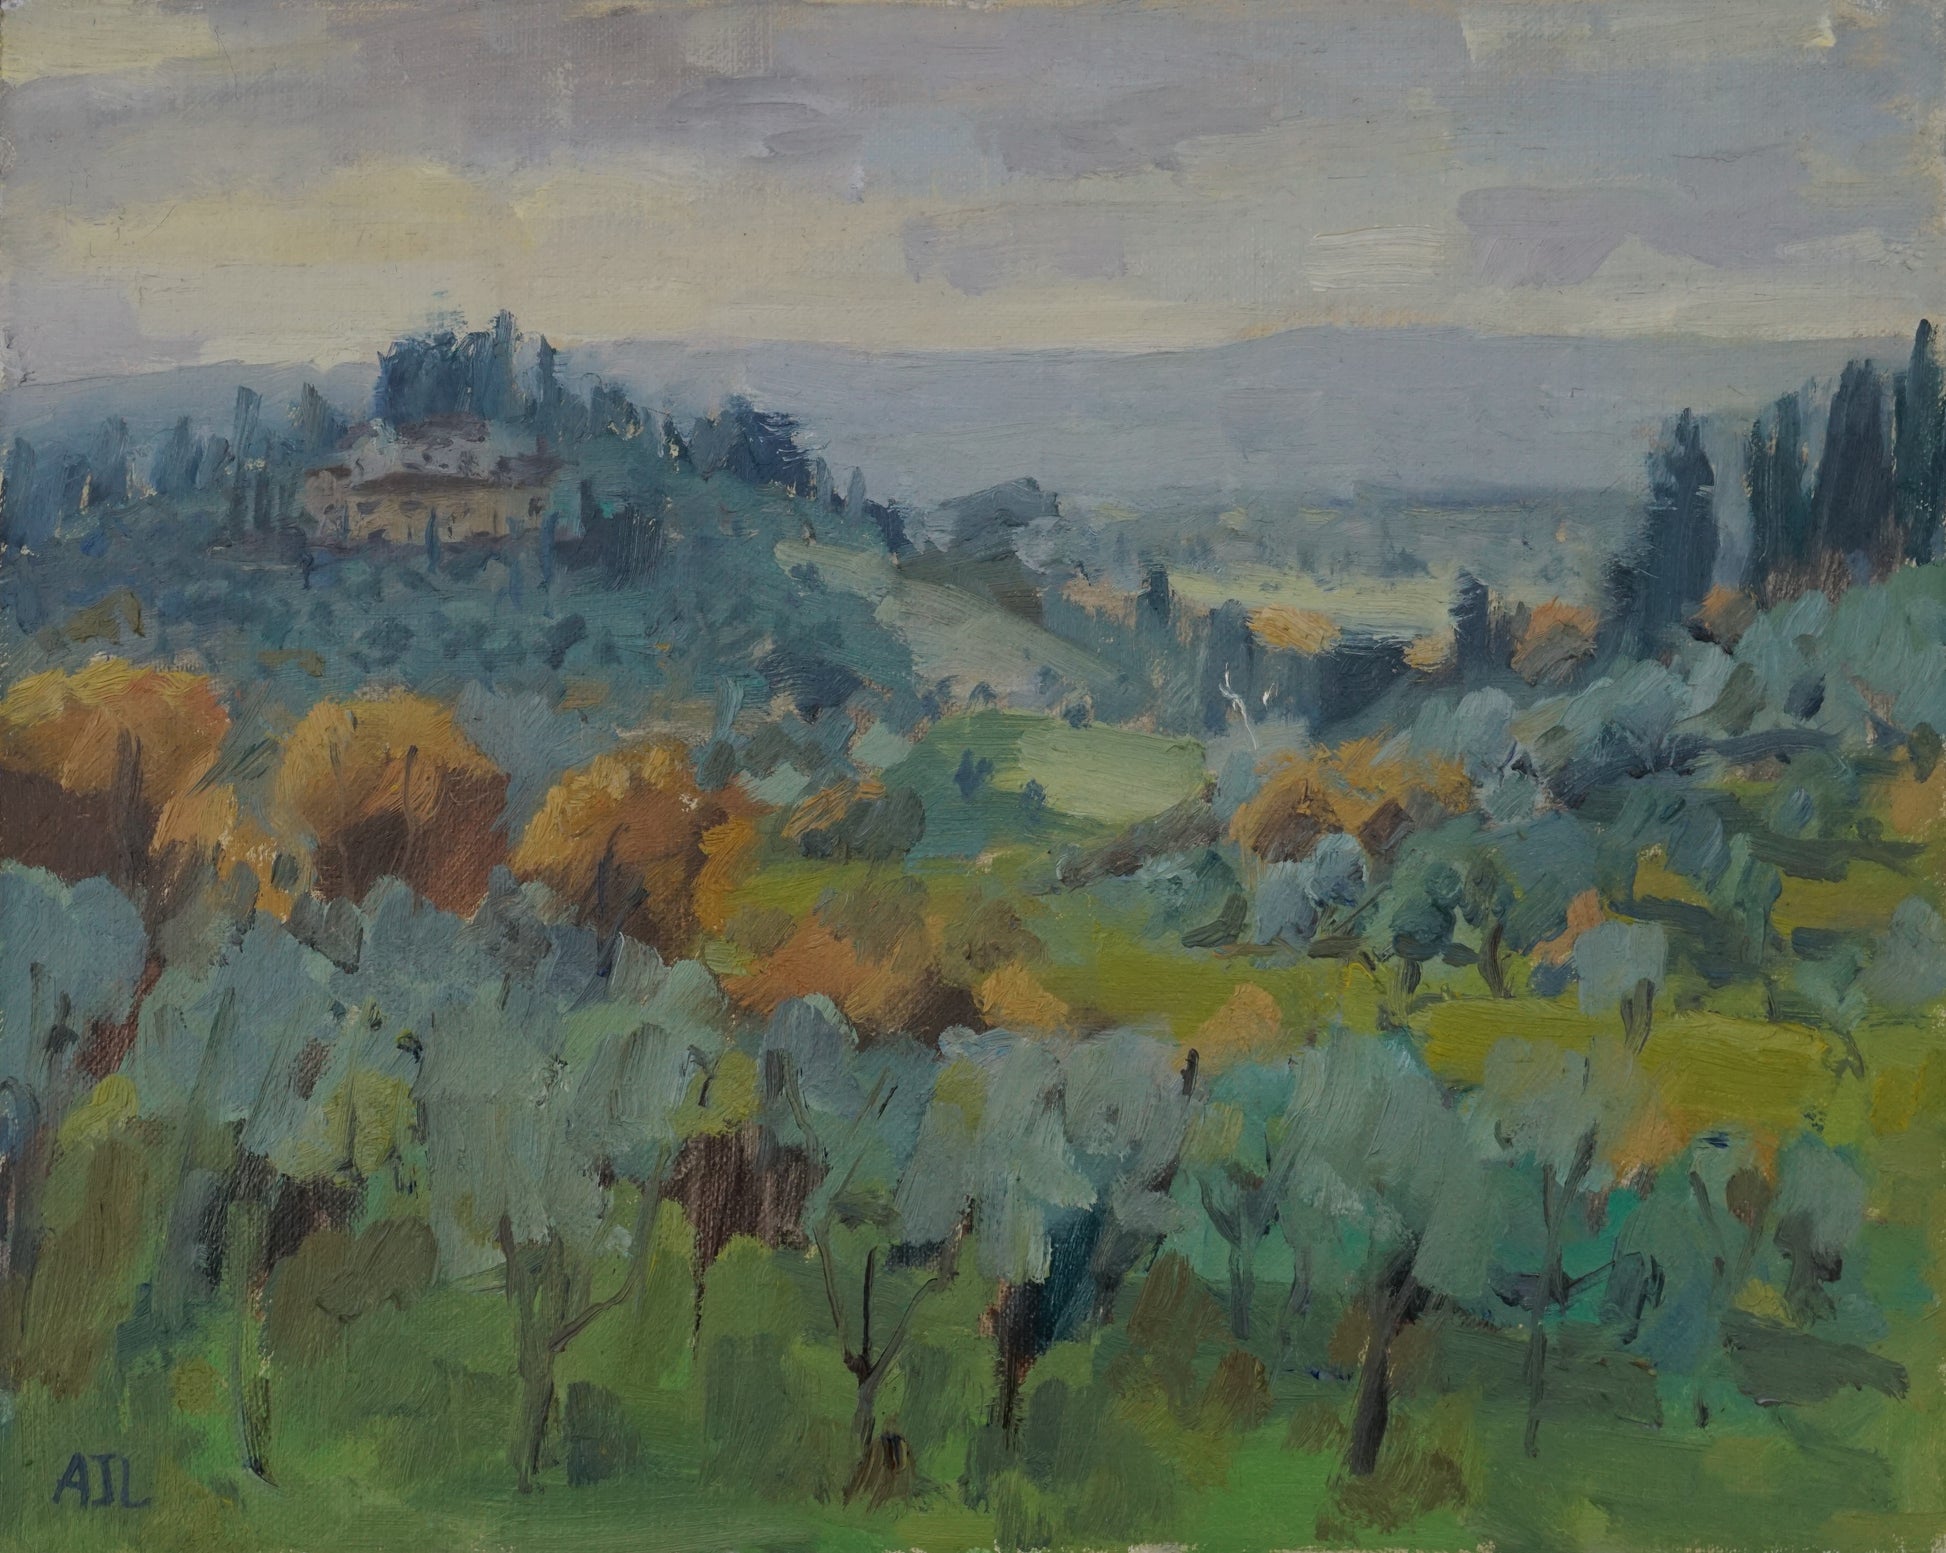 Painting depicting a field of olive trees in tuscany, bathed in a soft afternoon light